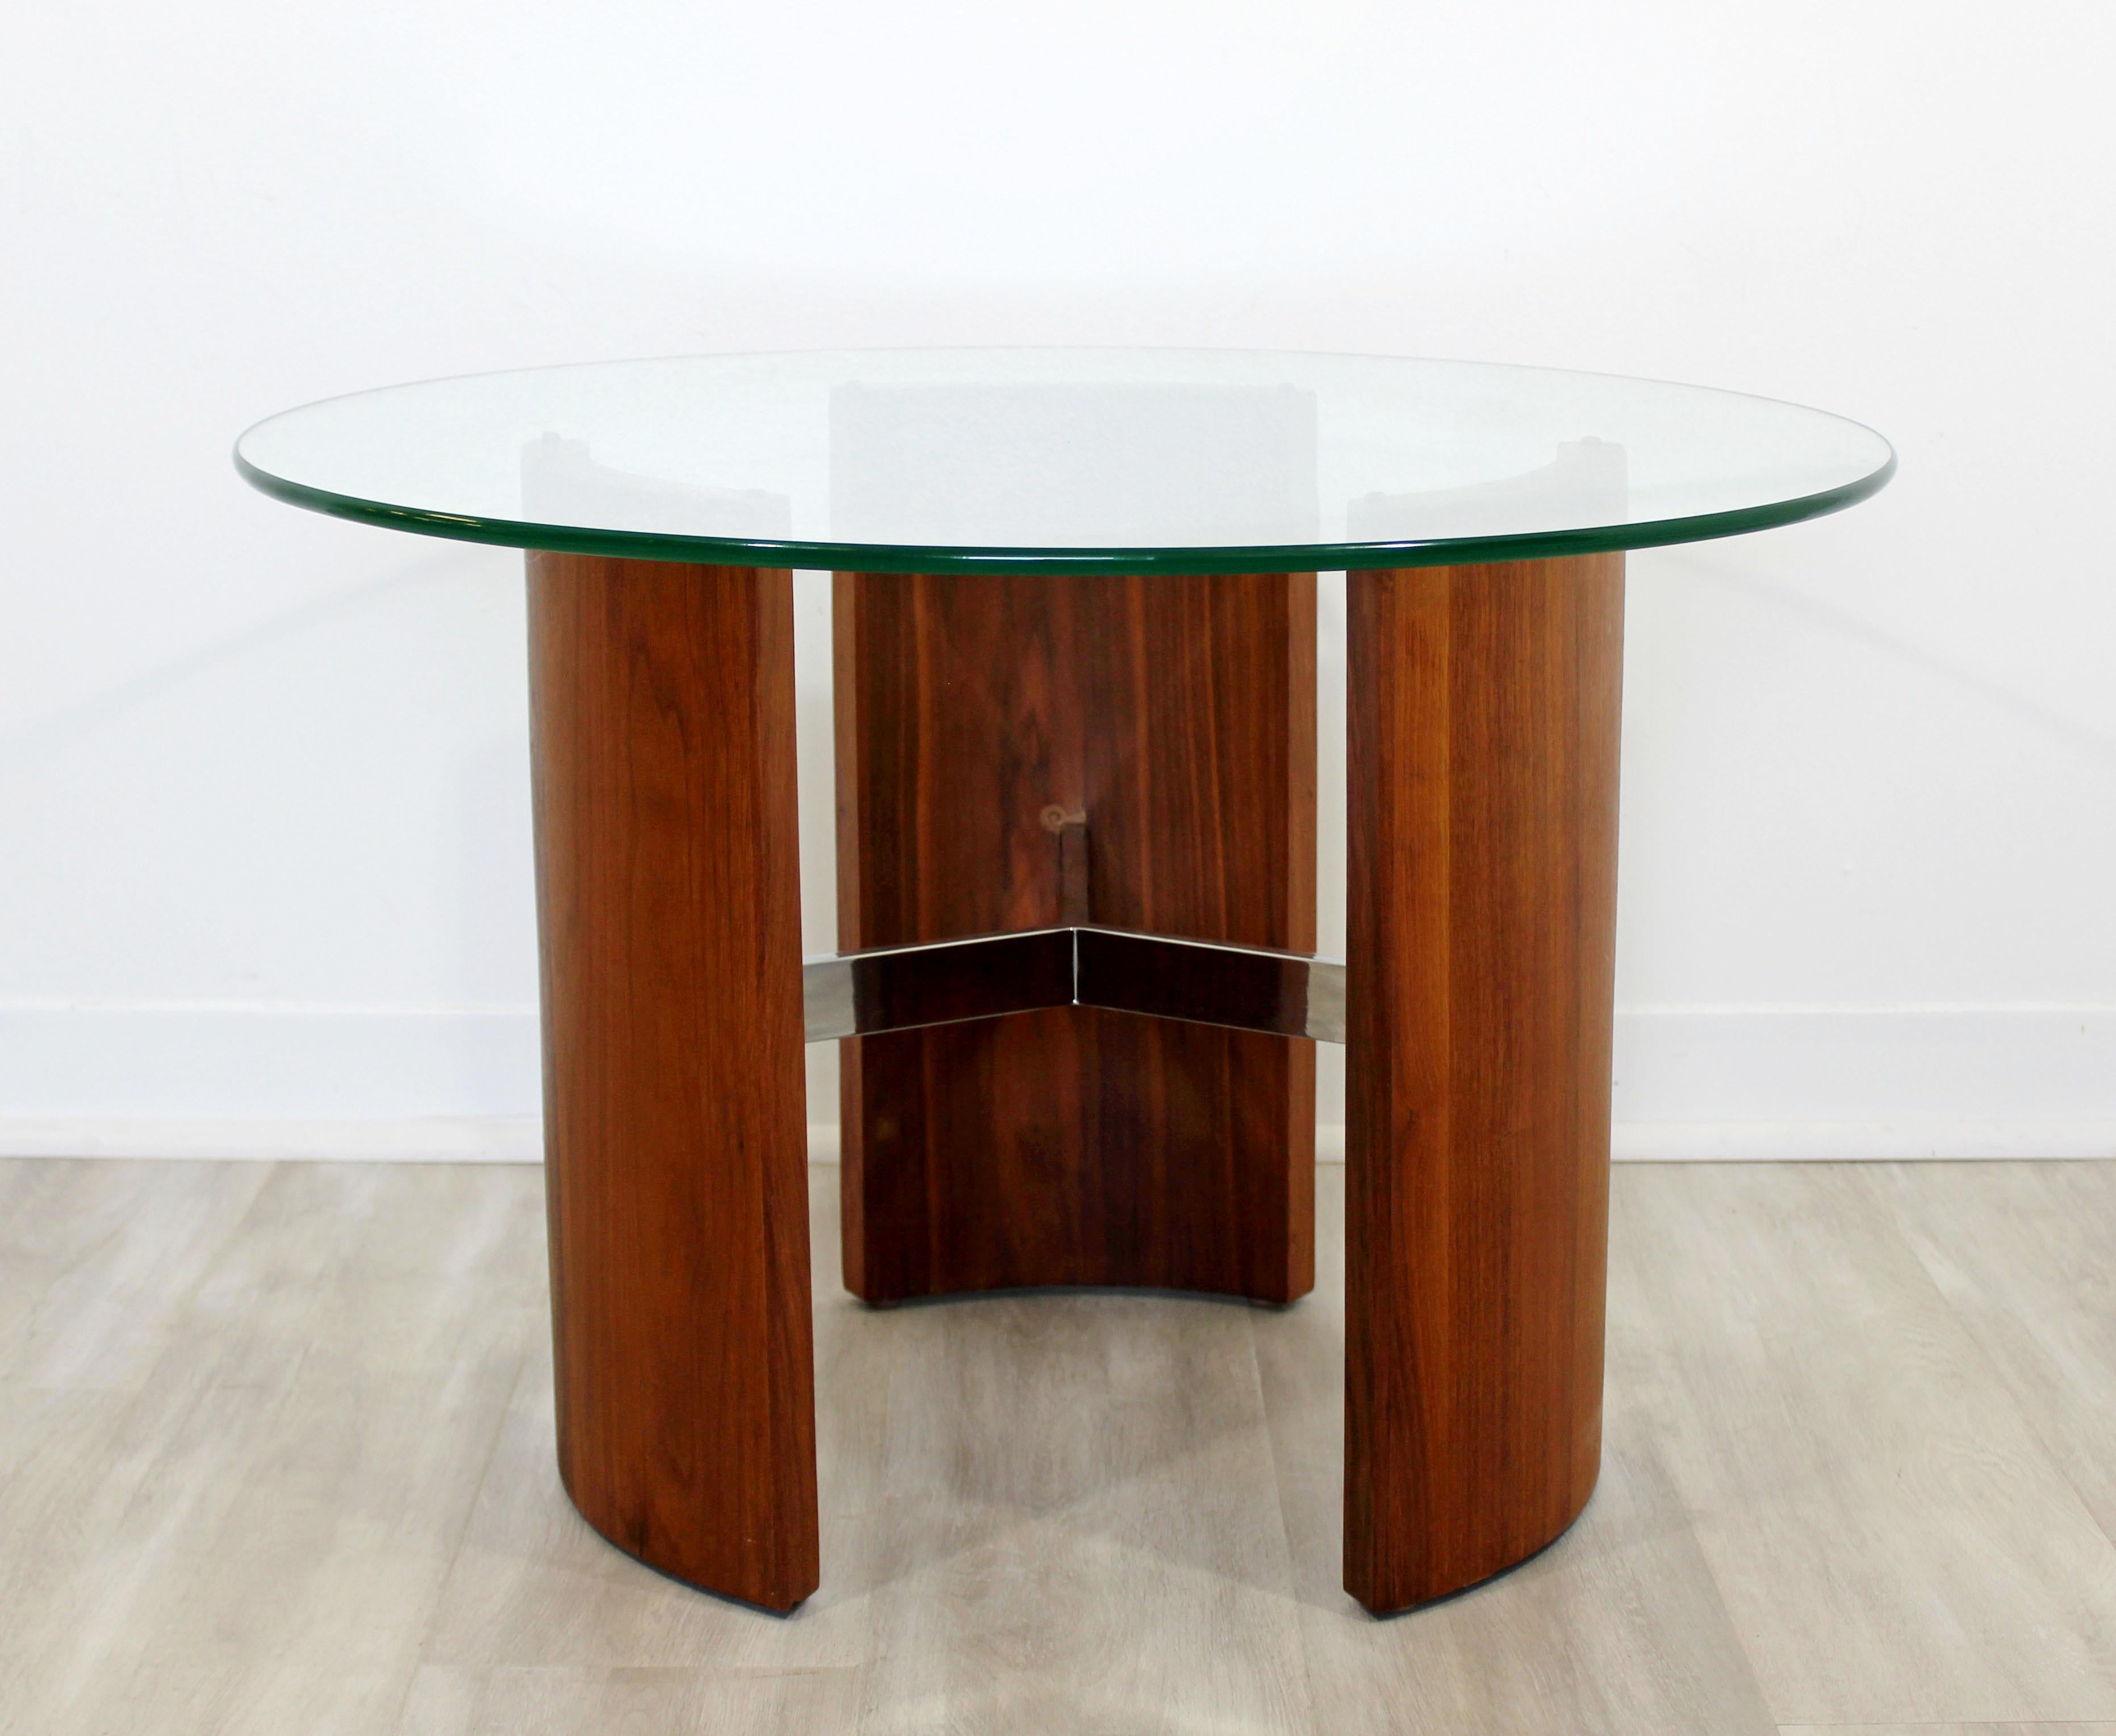 For your consideration is an incredible, Radius side or end table, with a sculptural walnut wood and chrome base and circular glass top, by Vladimir Kagan, circa 1960s. In very good condition. The dimensions are 30